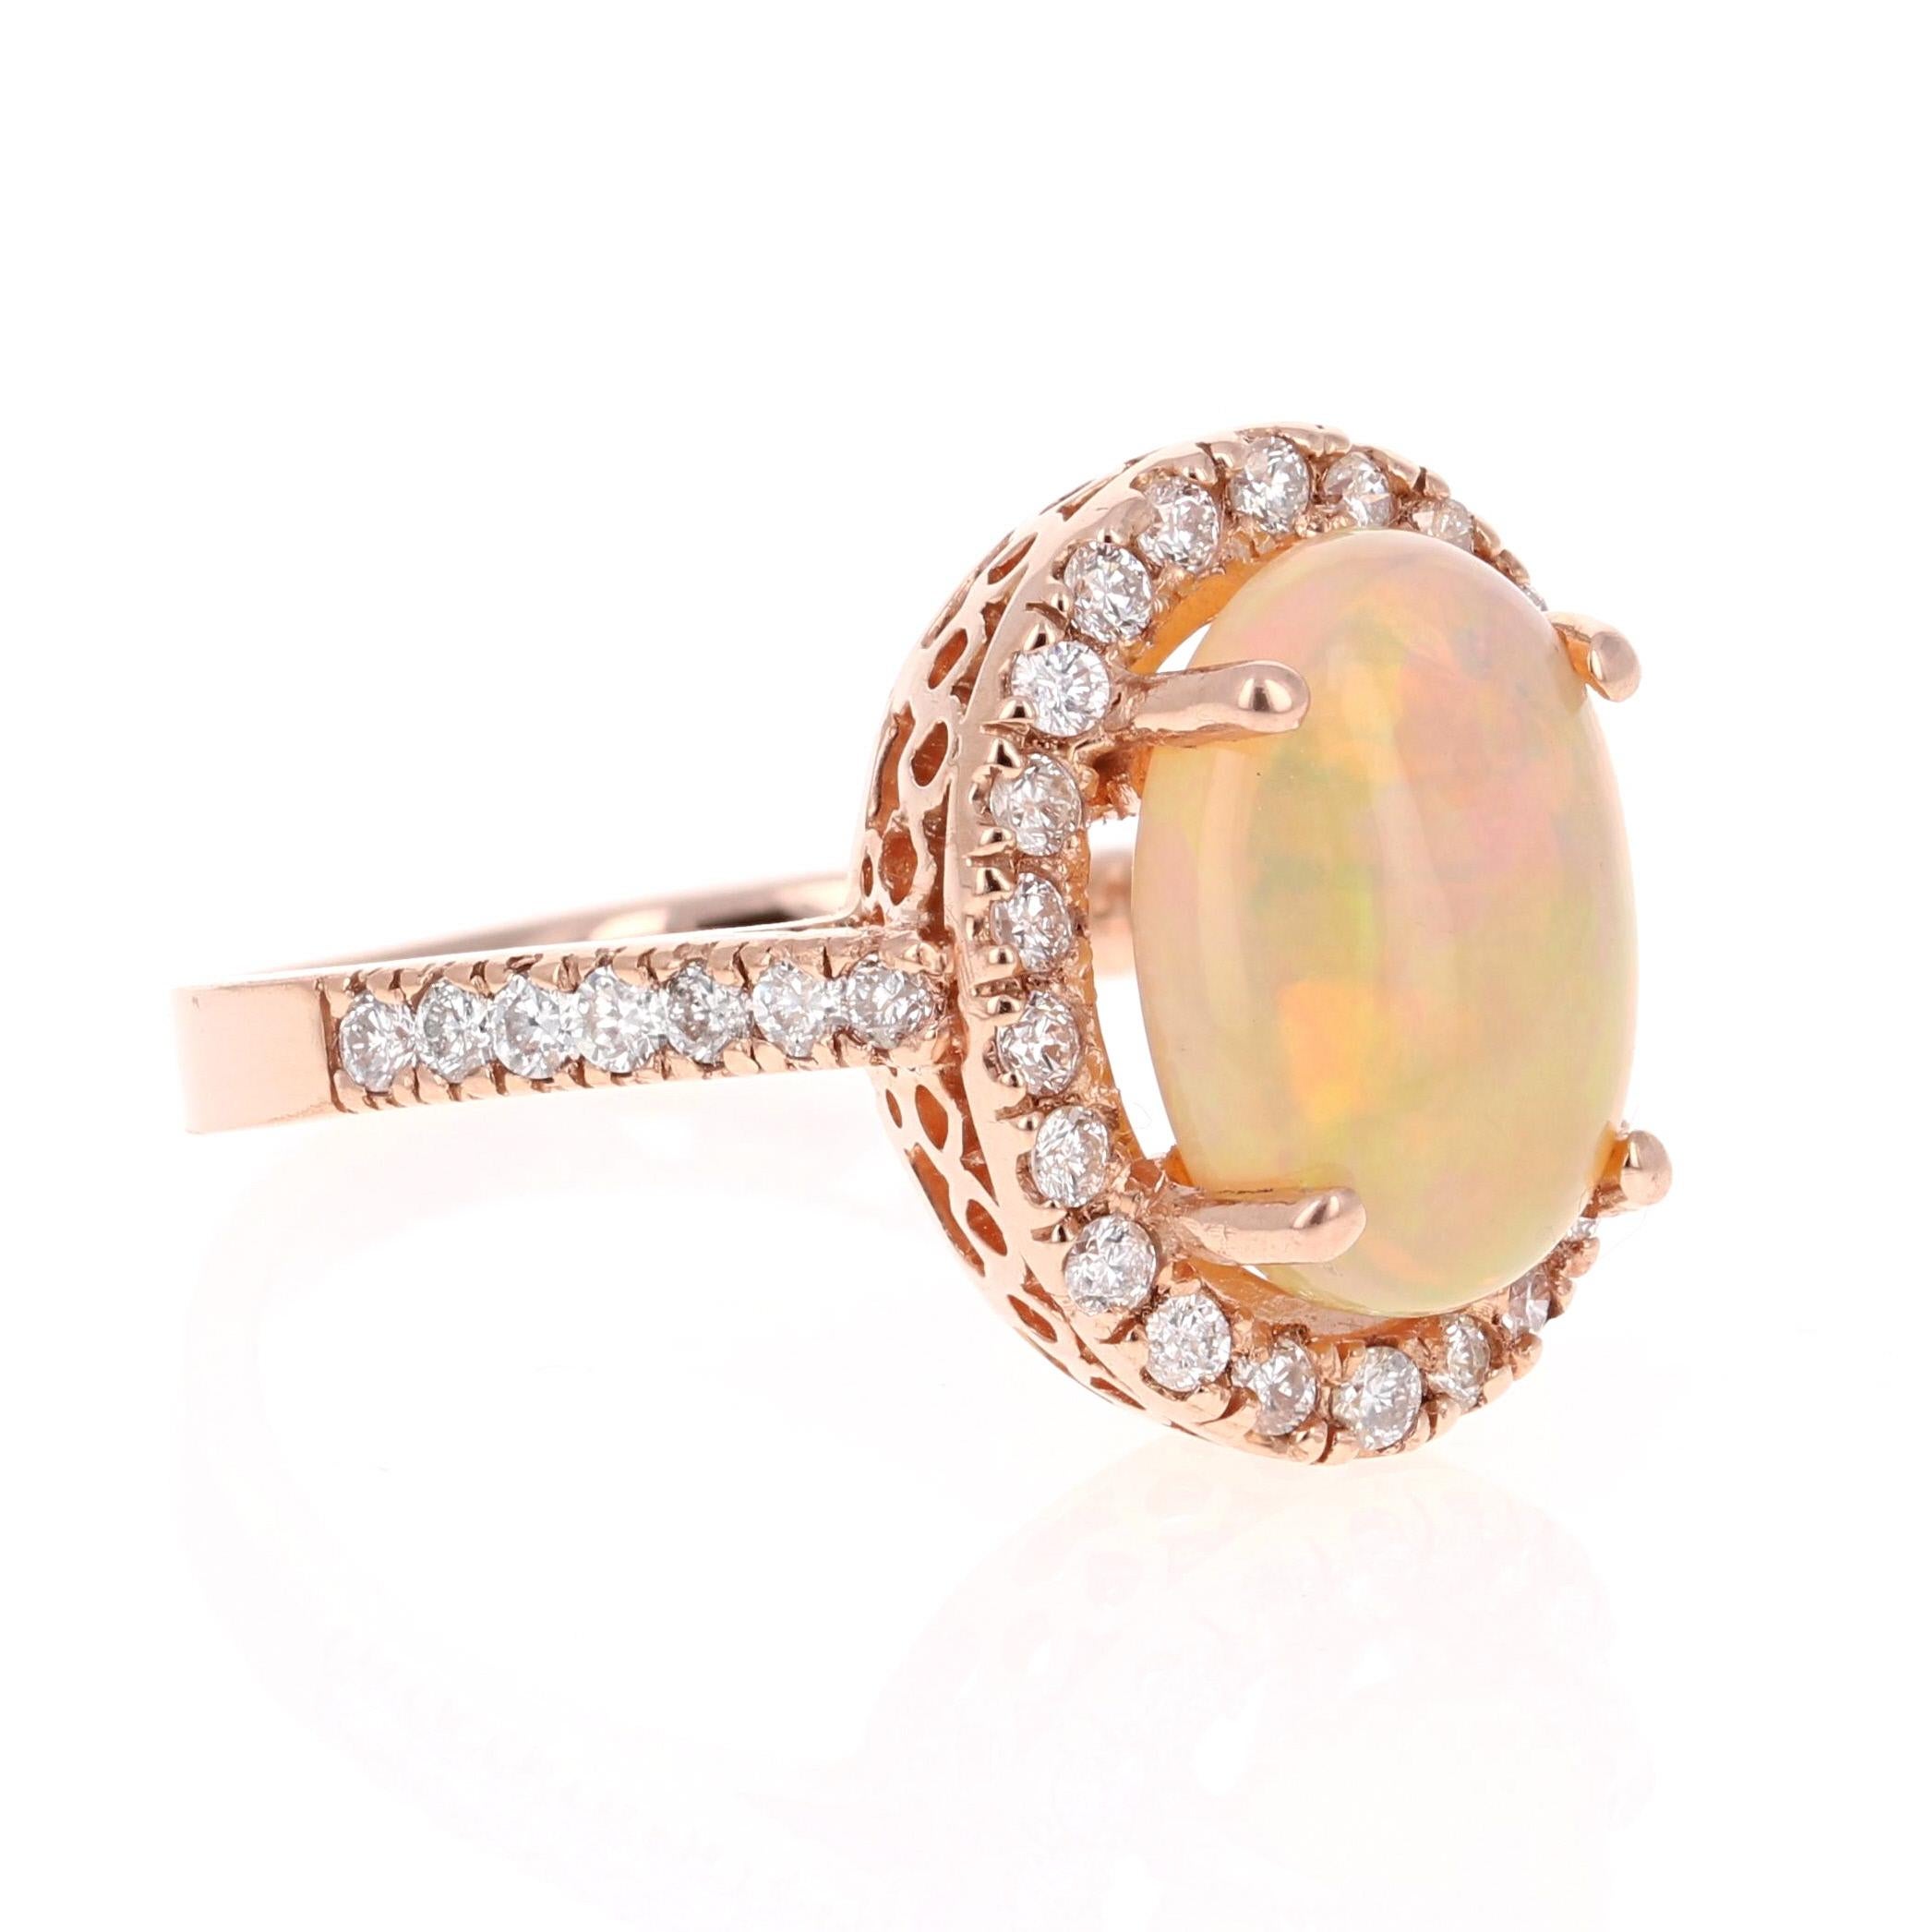 This ring has a 2.81 Carat Opal that is curated in a unique 14 Karat Rose Gold setting. The setting is adorned with 32 Round Cut Diamonds that weigh 0.70 Carats. The total carat weight of the ring is 3.51 Carats.

The Opal displays beautiful flashes